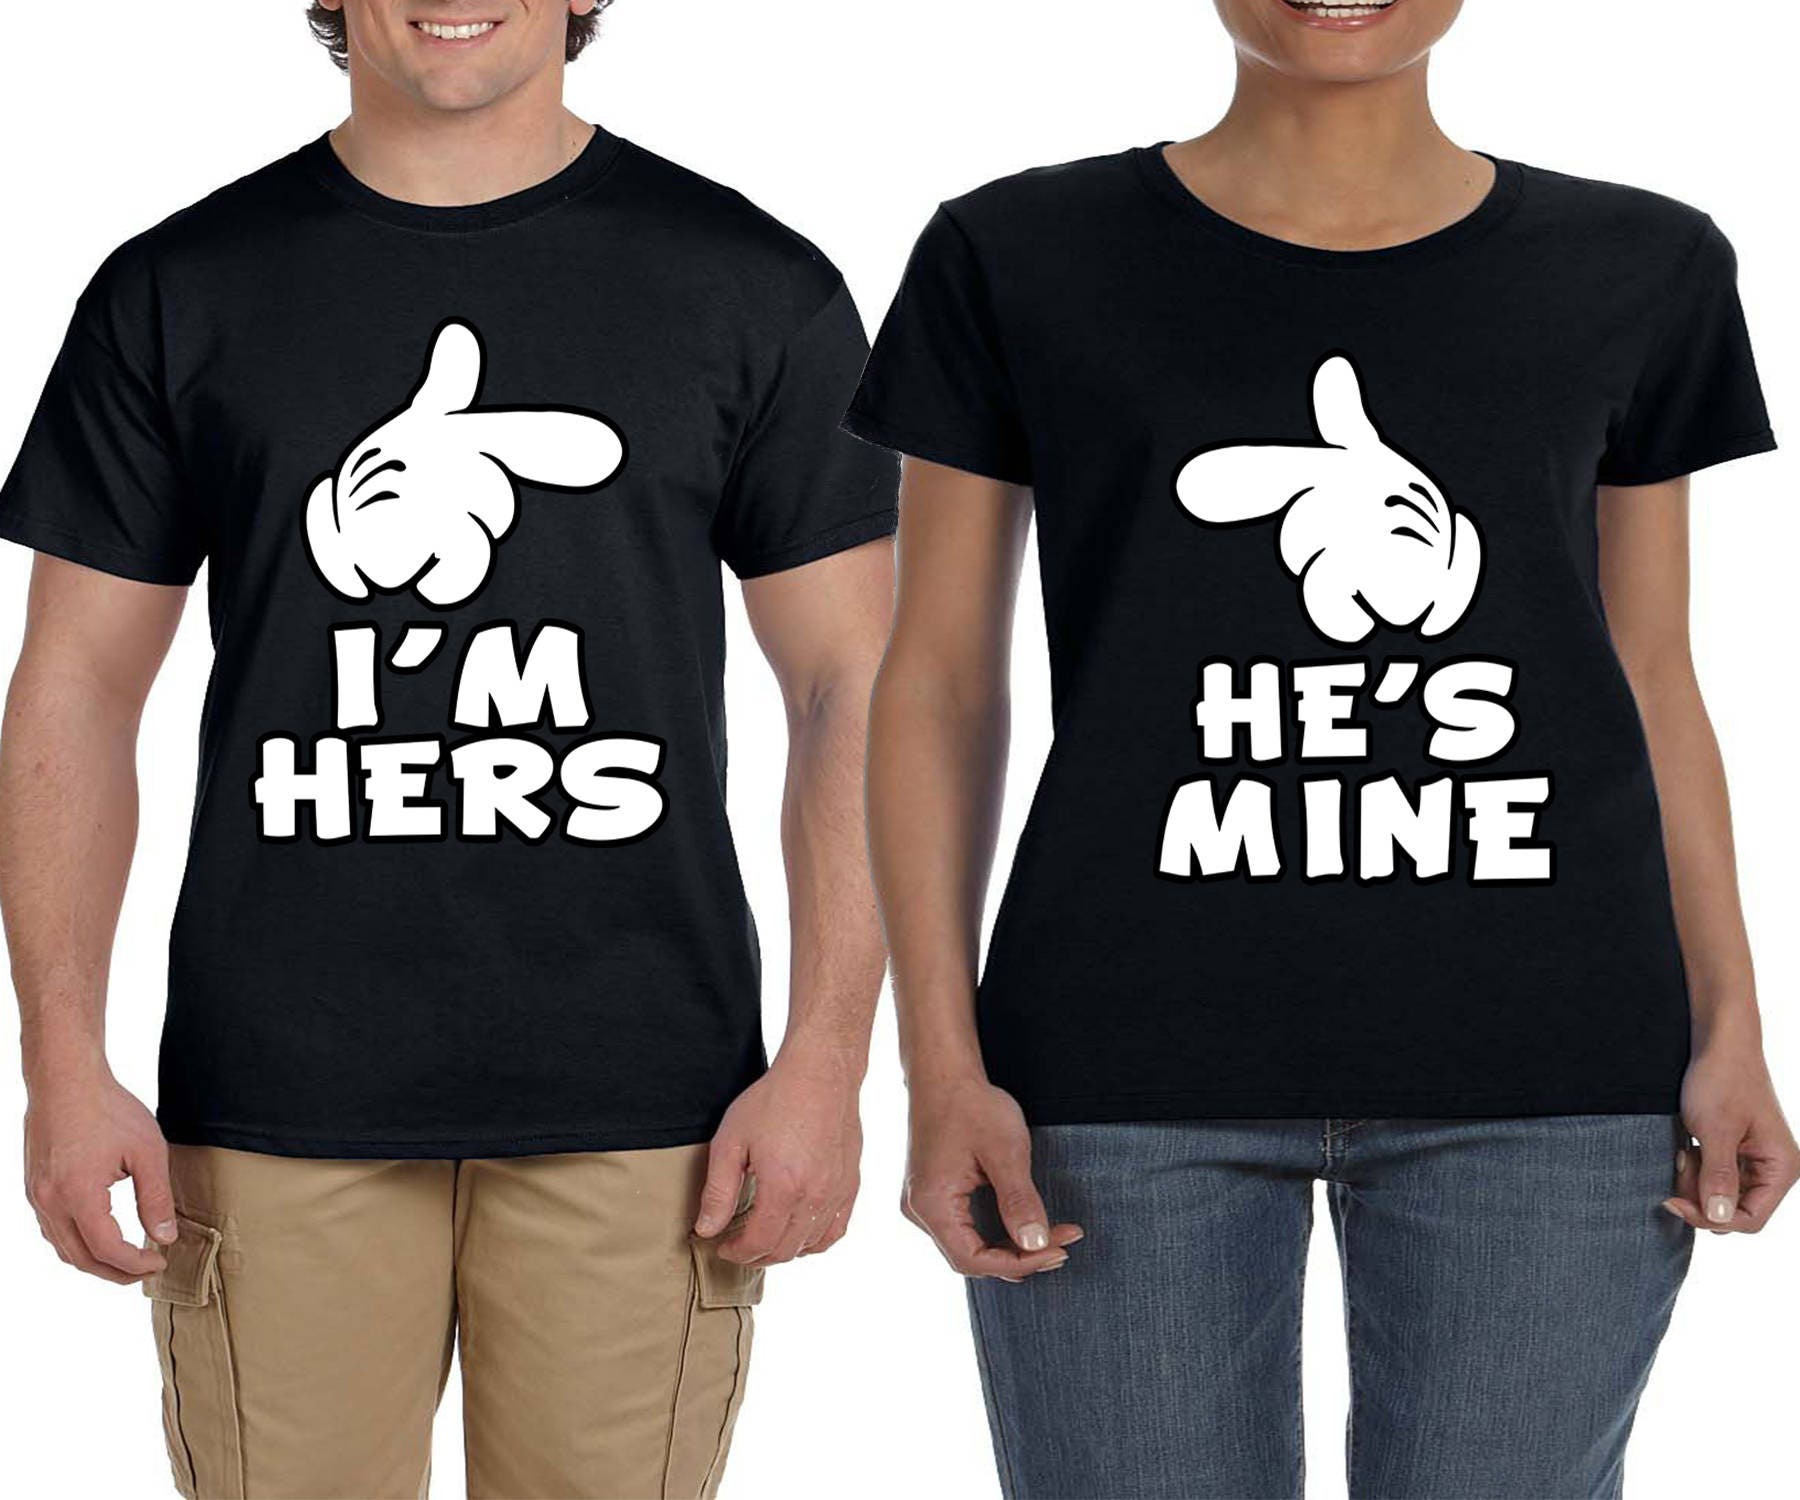 Matching Couple Shirts, He's Mine, I'm Hers, Popular T-shirt for Couple ...